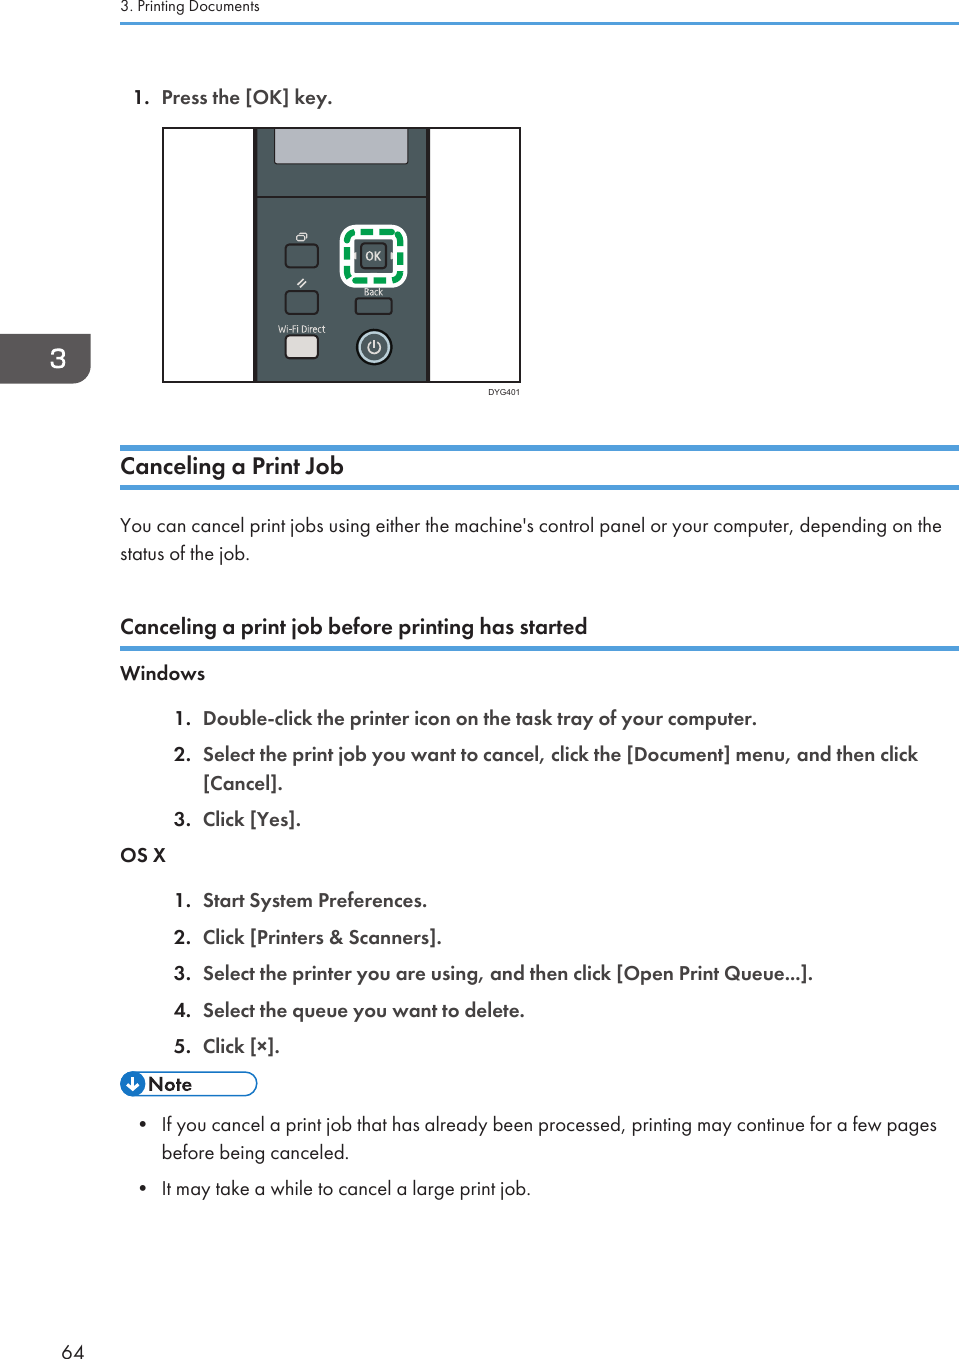 1. Press the [OK] key.DYG401Canceling a Print JobYou can cancel print jobs using either the machine&apos;s control panel or your computer, depending on thestatus of the job.Canceling a print job before printing has startedWindows1. Double-click the printer icon on the task tray of your computer.2. Select the print job you want to cancel, click the [Document] menu, and then click[Cancel].3. Click [Yes].OS X1. Start System Preferences.2. Click [Printers &amp; Scanners].3. Select the printer you are using, and then click [Open Print Queue...].4. Select the queue you want to delete.5. Click [×].• If you cancel a print job that has already been processed, printing may continue for a few pagesbefore being canceled.• It may take a while to cancel a large print job.3. Printing Documents64